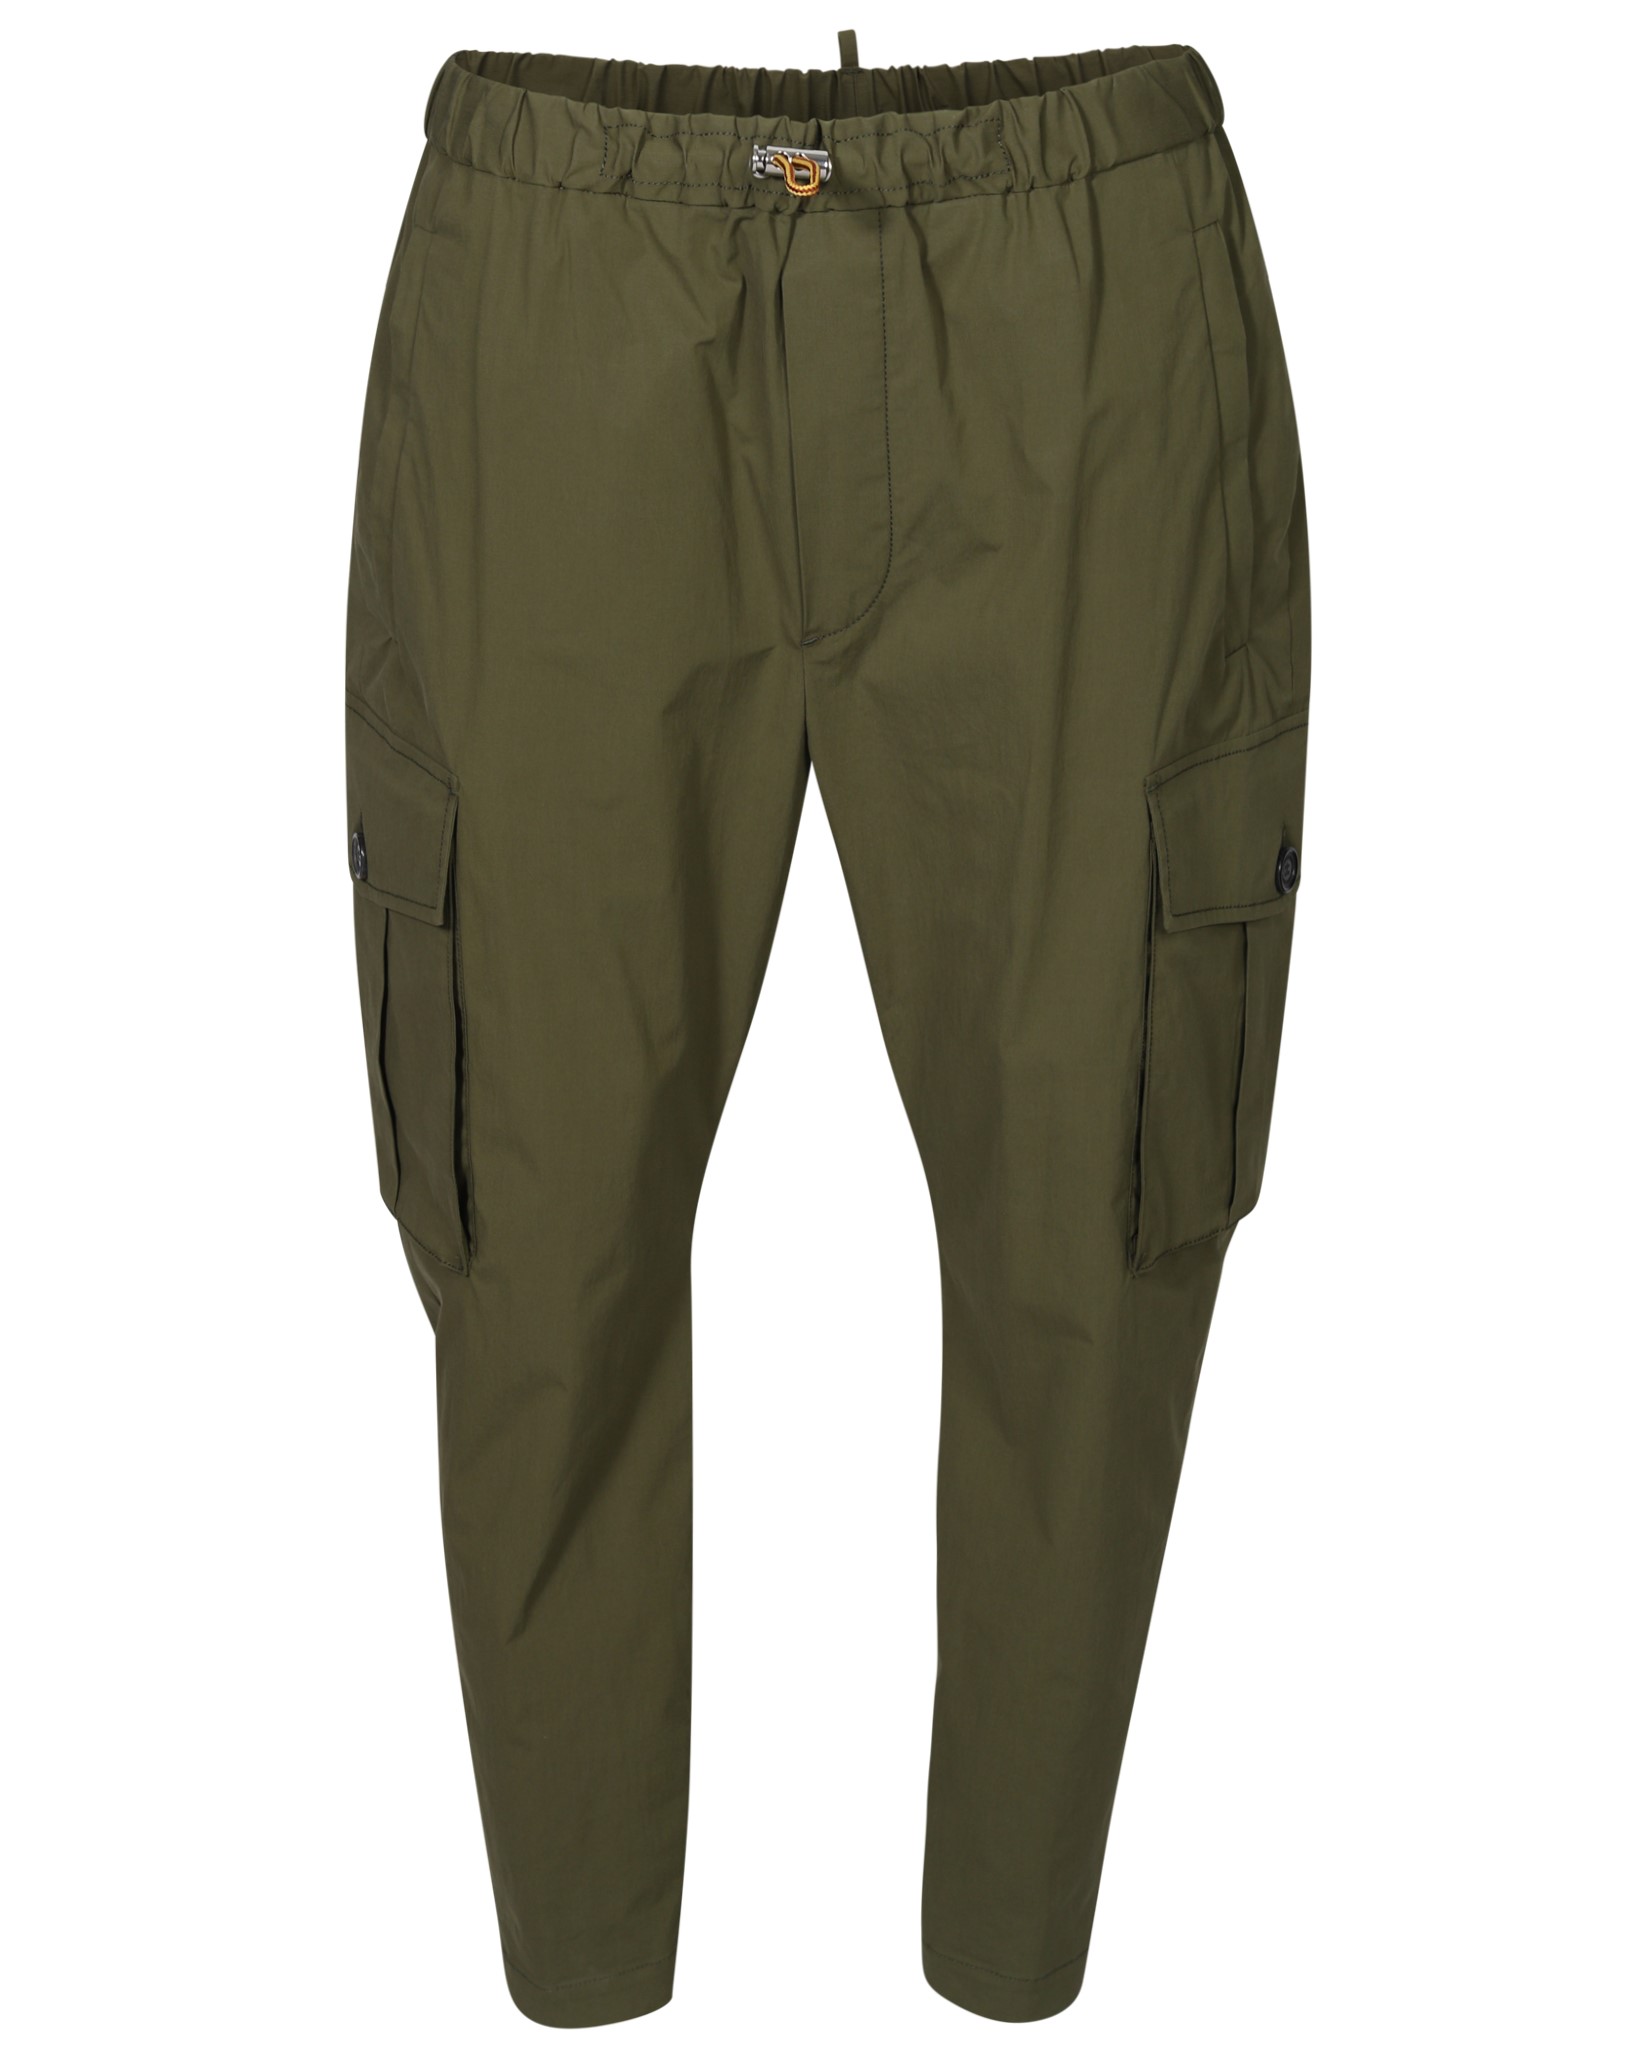 DSQUARED2 Pully Cargo Pant in Olive 50